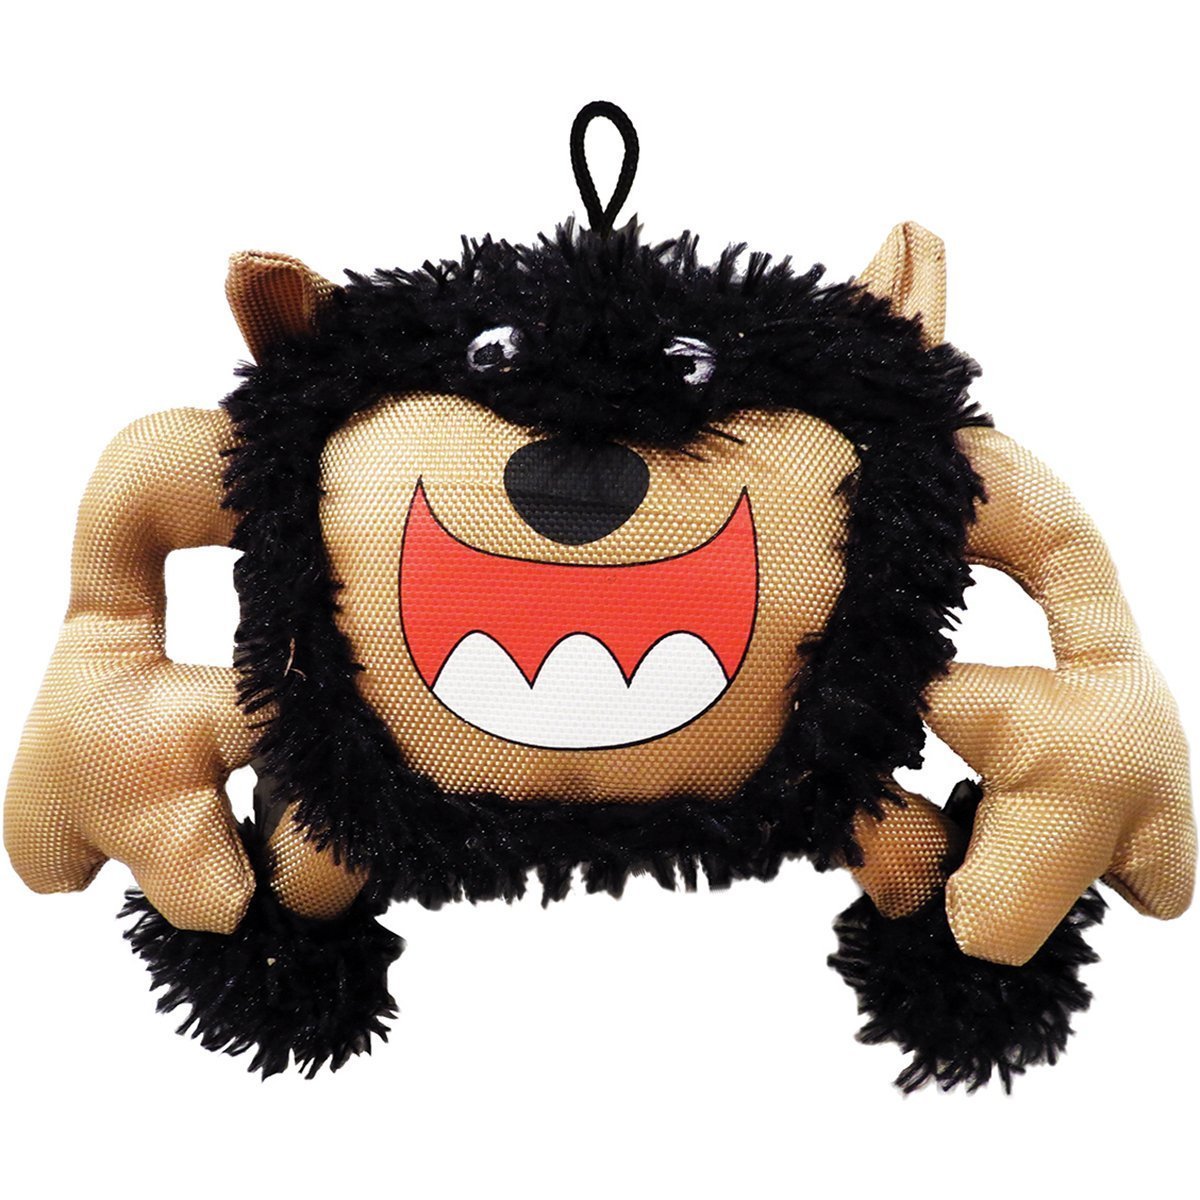 Scoochie Pet Products Monster Dog Toy|Scary Big Mouth Monster|9 Inch|Plush Dog Toy|We Squeak